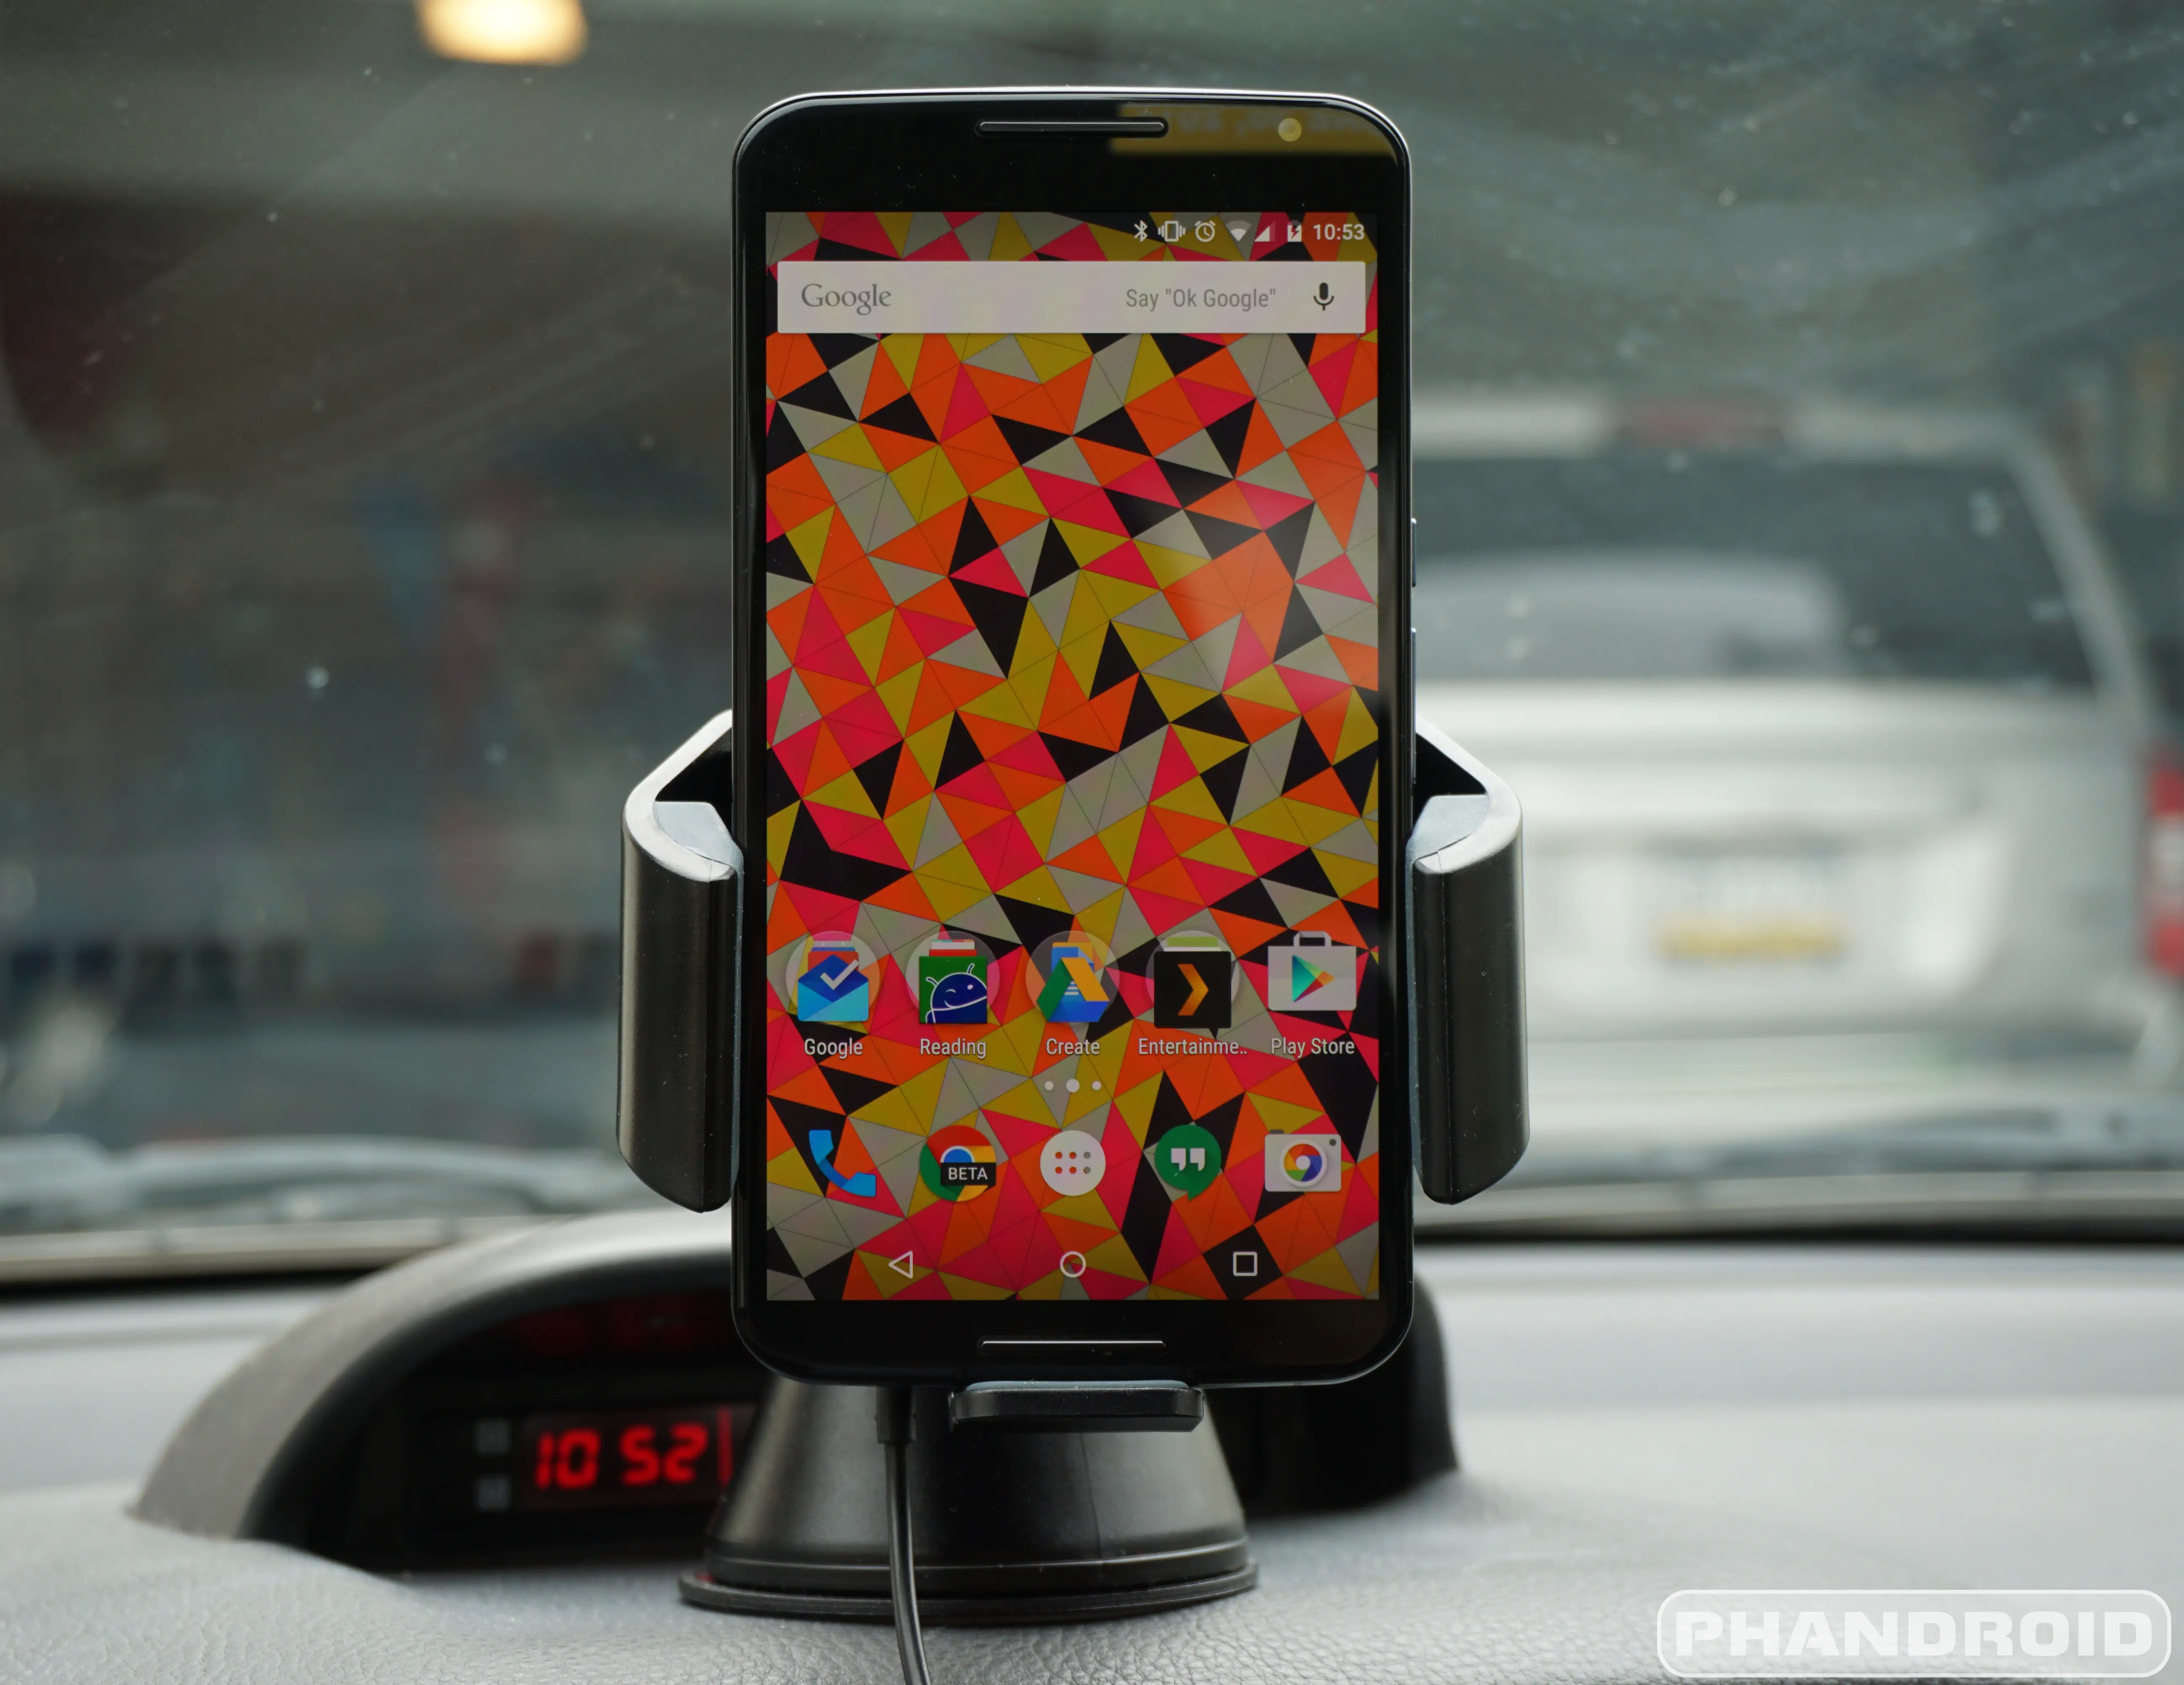 Google is adding a built-in Dashcam feature to Android phones - The Verge